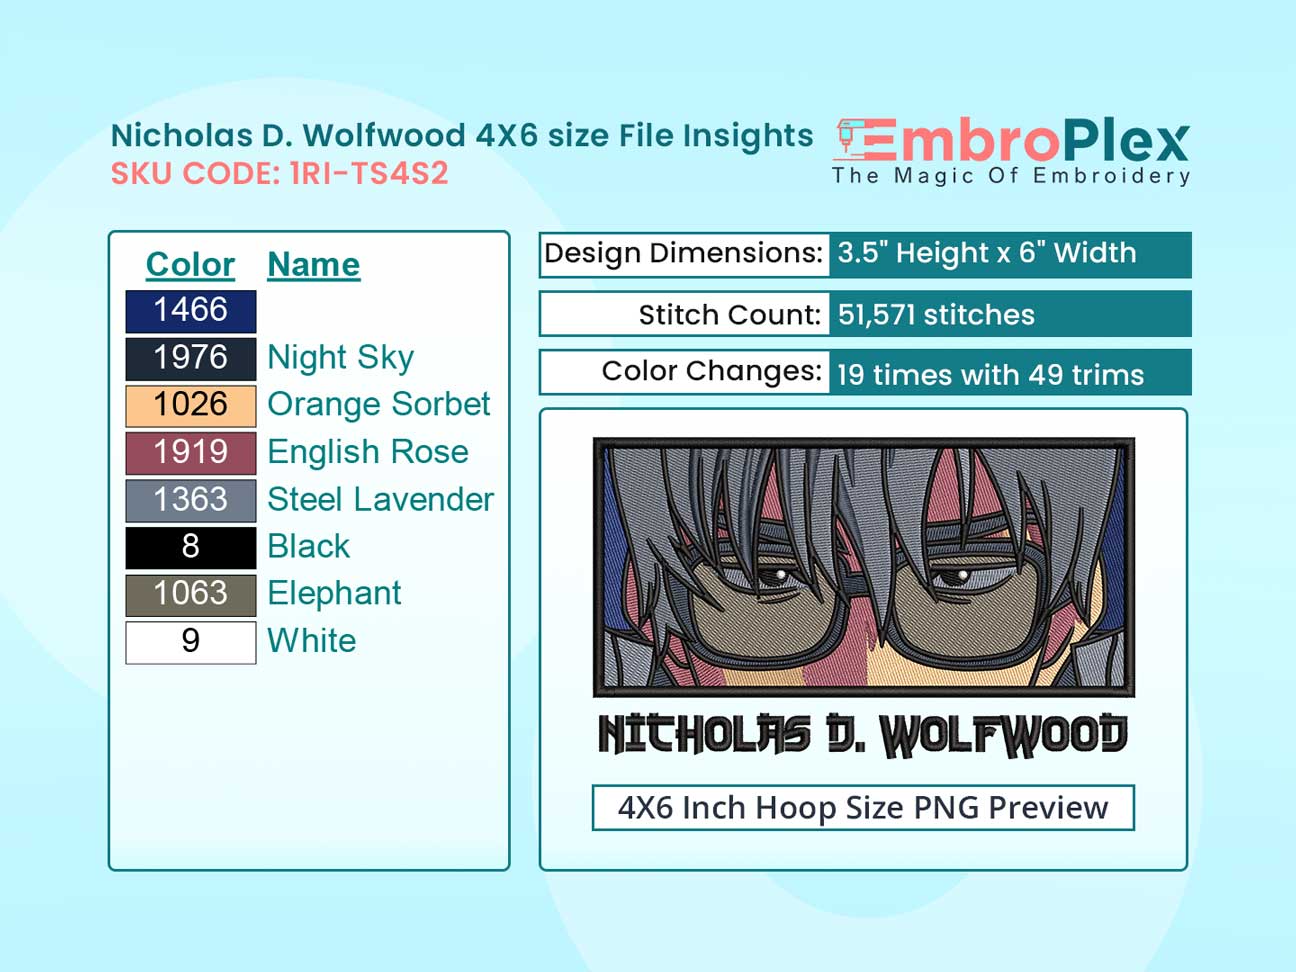 Anime-Inspired Nicholas D. Wolfwood Embroidery Design File - 4x6 Inch hoop Size Variation overview image